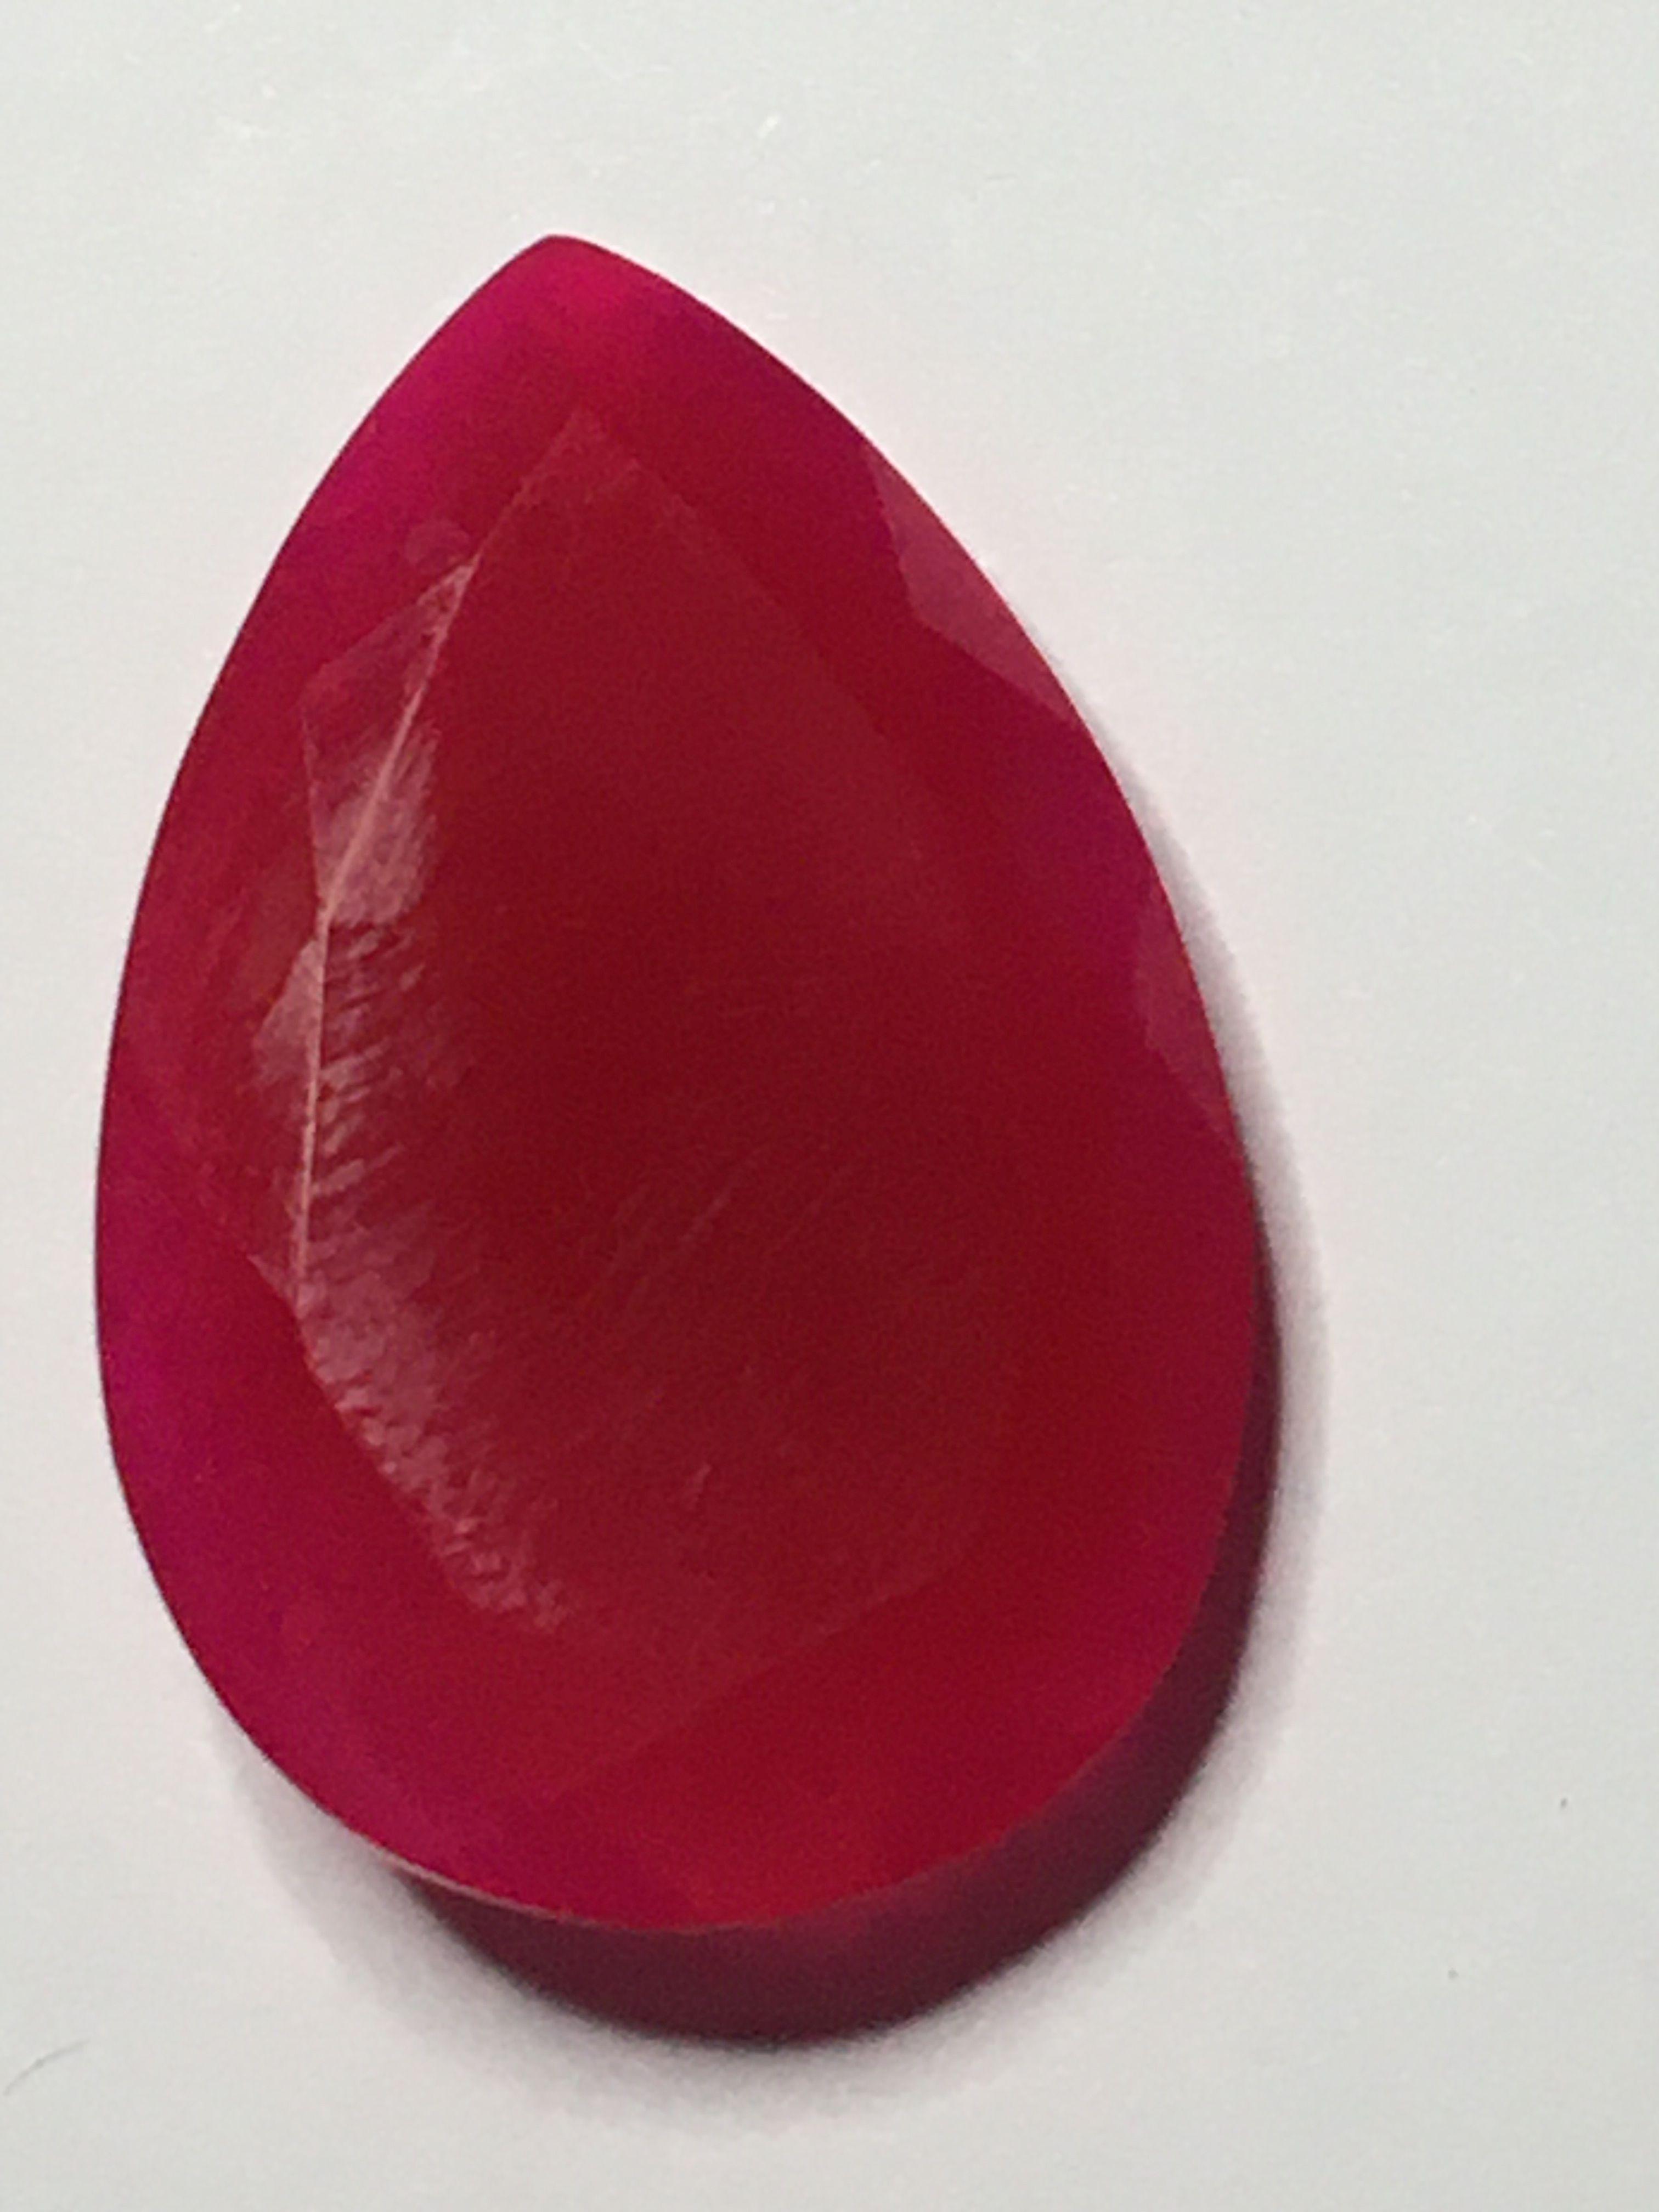 Ruby Madagascar Blood Red 25.2+ Cts Huge Tear Drop Cut Wow Gem Natural Earth Mined